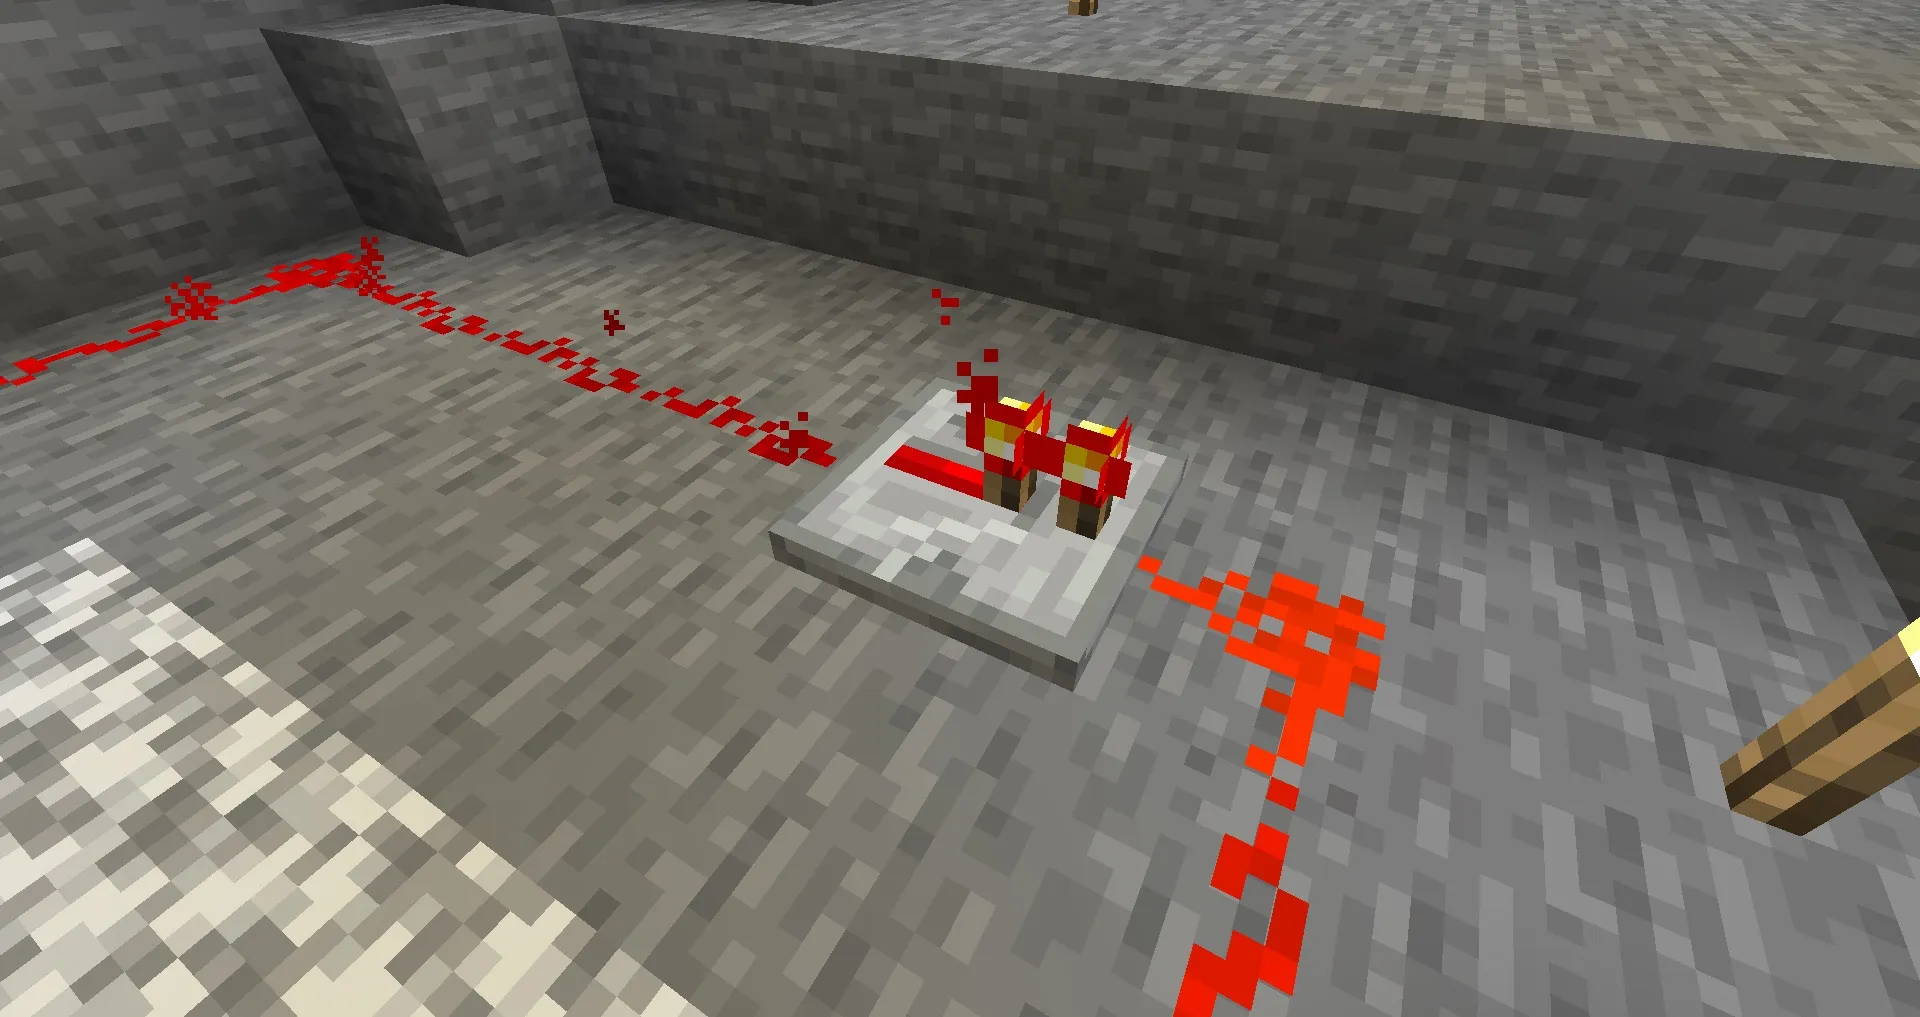 Redstone Repeater in action